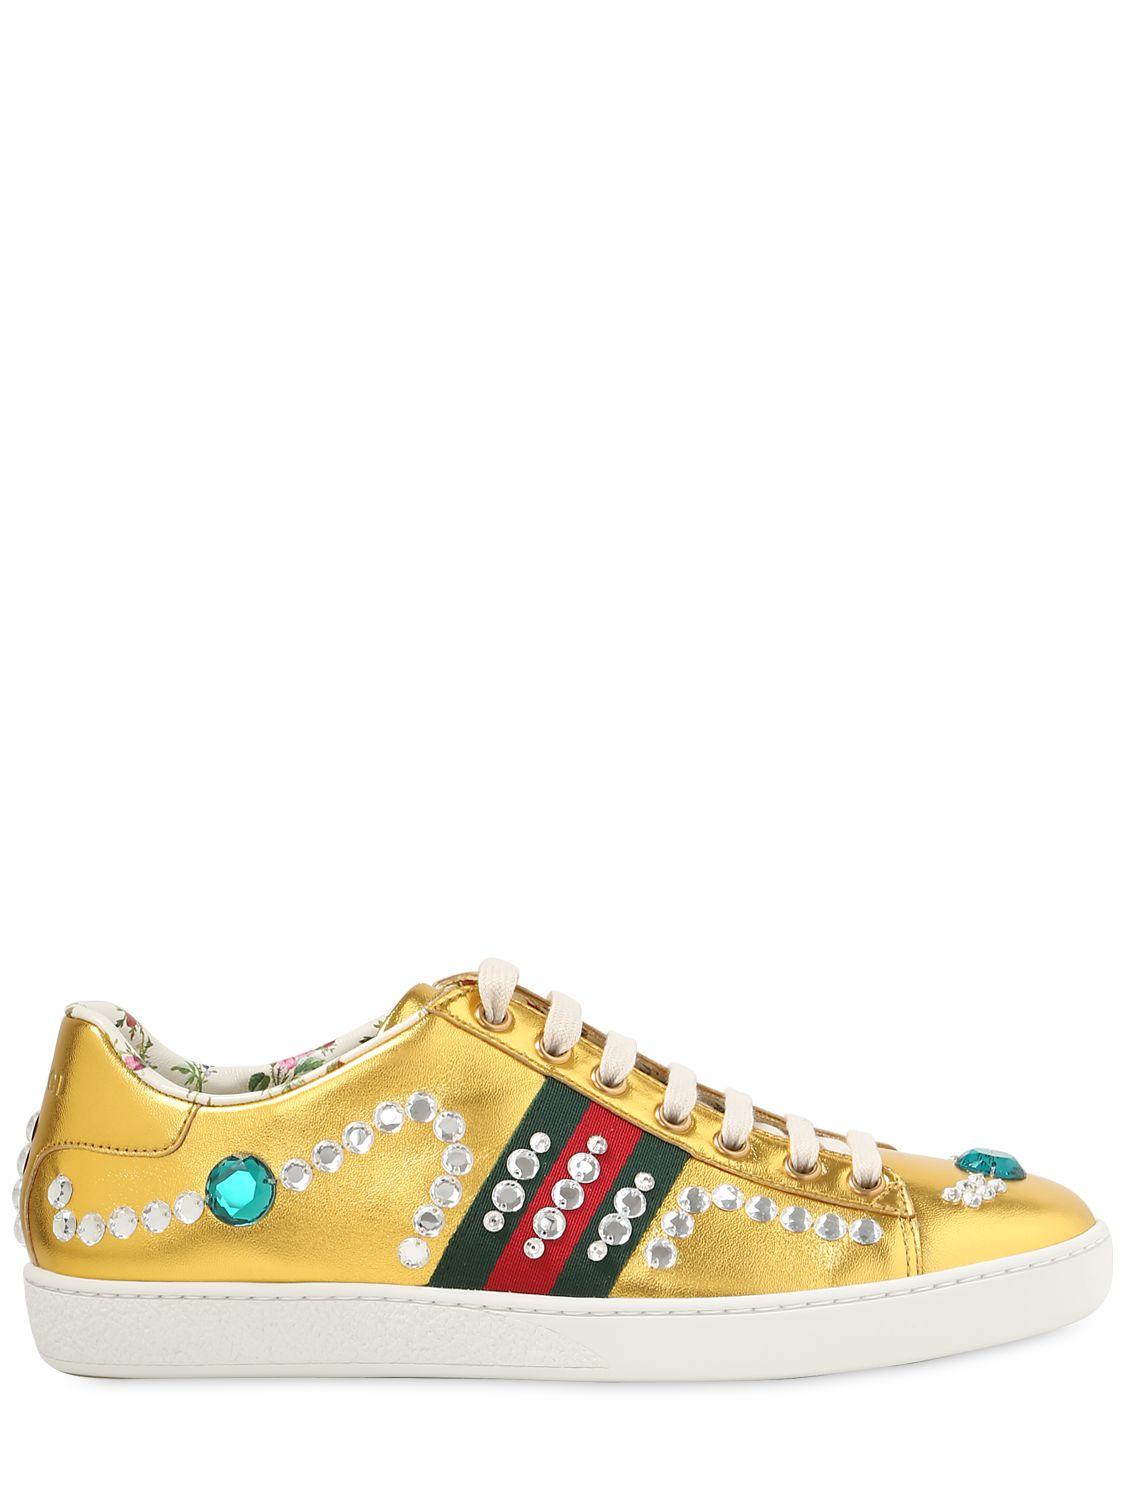 Gucci New Ace Jeweled Metallic Leather Sneakers - Lyst